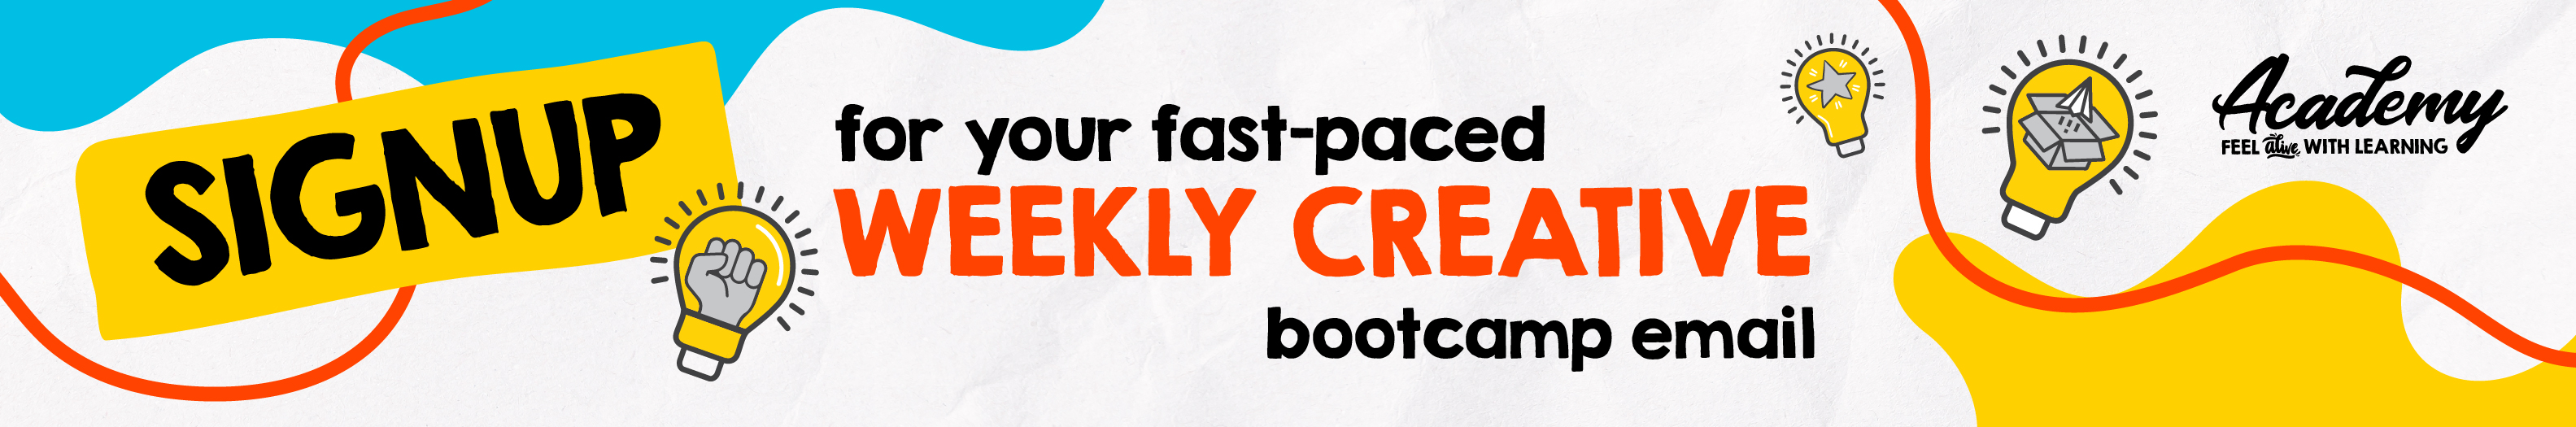 Signup for your fast paced weekly creative bootcamp email